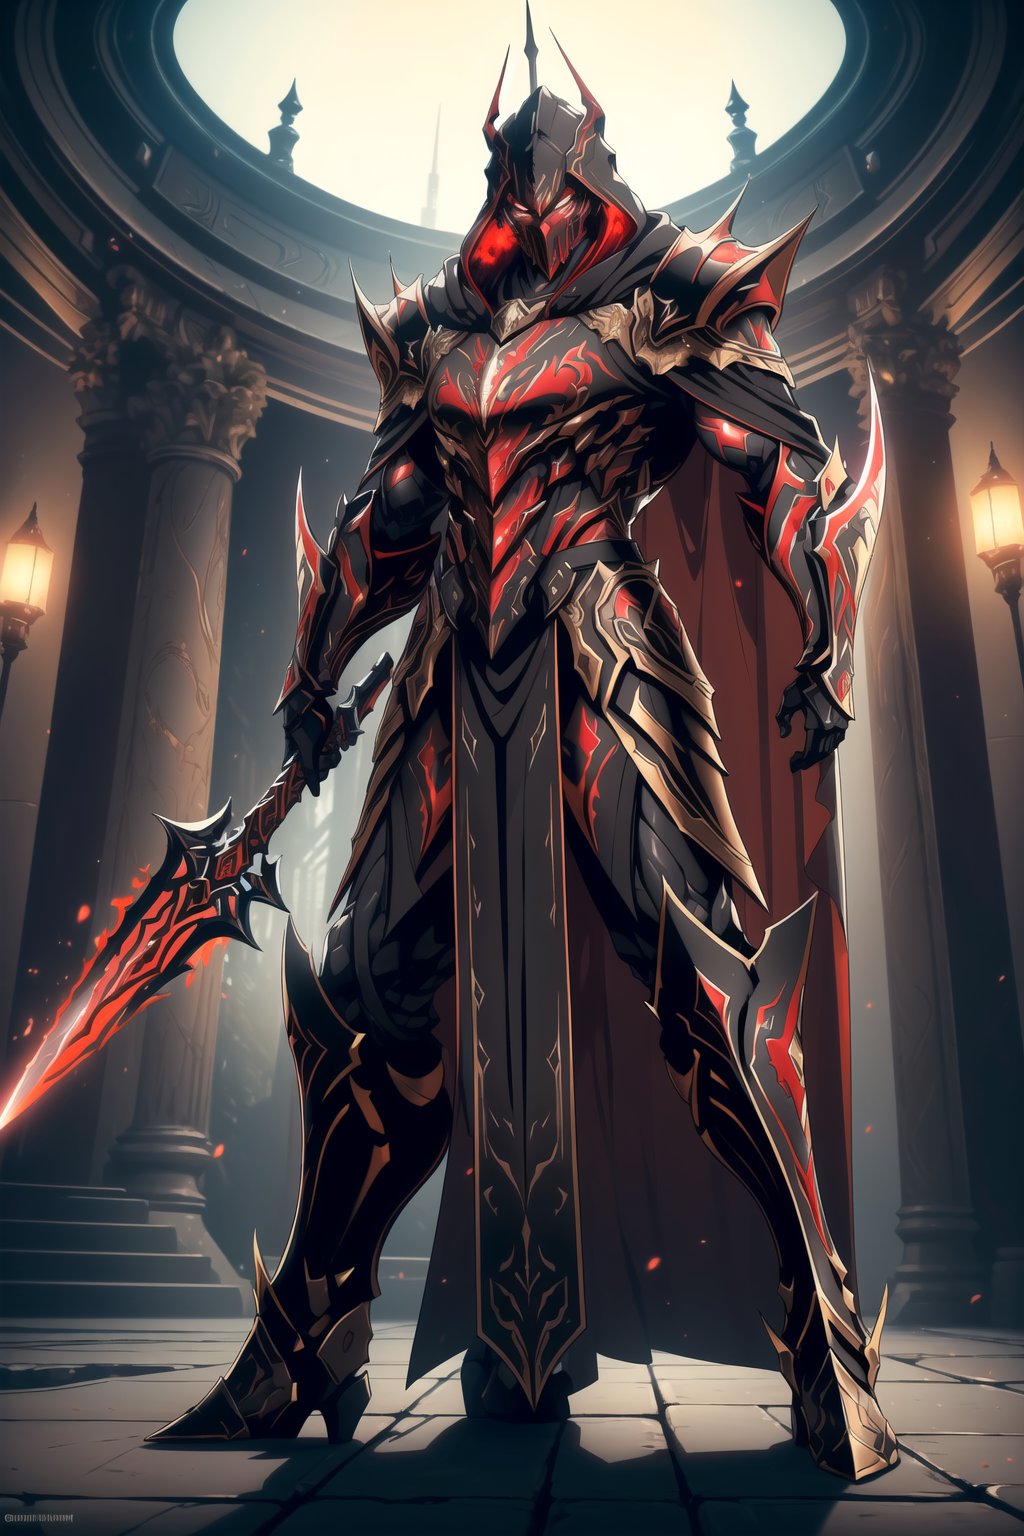 (Masterpiece, Best Quality), (Spartan Warrior in Warframe Style Armor), (Masculine Appearance:1.4), (Muscular Frame Build:1.2), (Glowing Golden Eyes), (Wearing Red and Black Spartan-Themed Armor and Black Flowing Cloak:1.4), (Wielding a Flaming Sword:1.4), (Colloseum Arena at Noon:1.2), (Action Pose:1.4), Centered, (Half Body Shot:1.4), (From Front Shot:1.2), Insane Details, Intricate Face Detail, Intricate Hand Details, Cinematic Shot and Lighting, Realistic and Vibrant Colors, Sharp Focus, Ultra Detailed, Realistic Images, Depth of Field, Incredibly Realistic Environment and Scene, Master Composition and Cinematography, castlevania style,castlevania style,WARFRAME